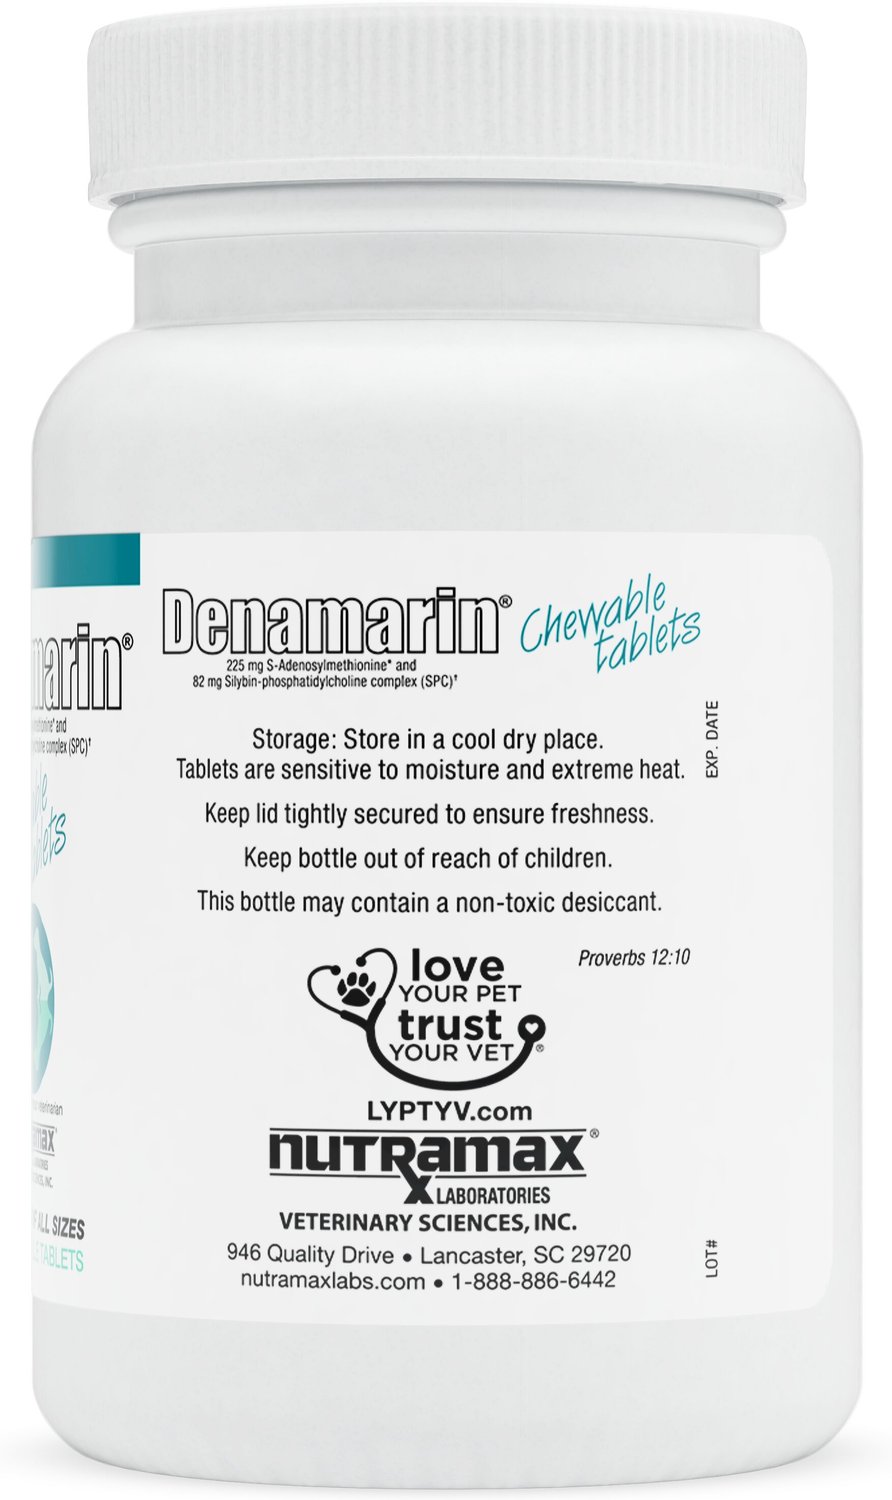 NUTRAMAX Denamarin Chewable Tablets Dog Supplement (Free Shipping) Chewy